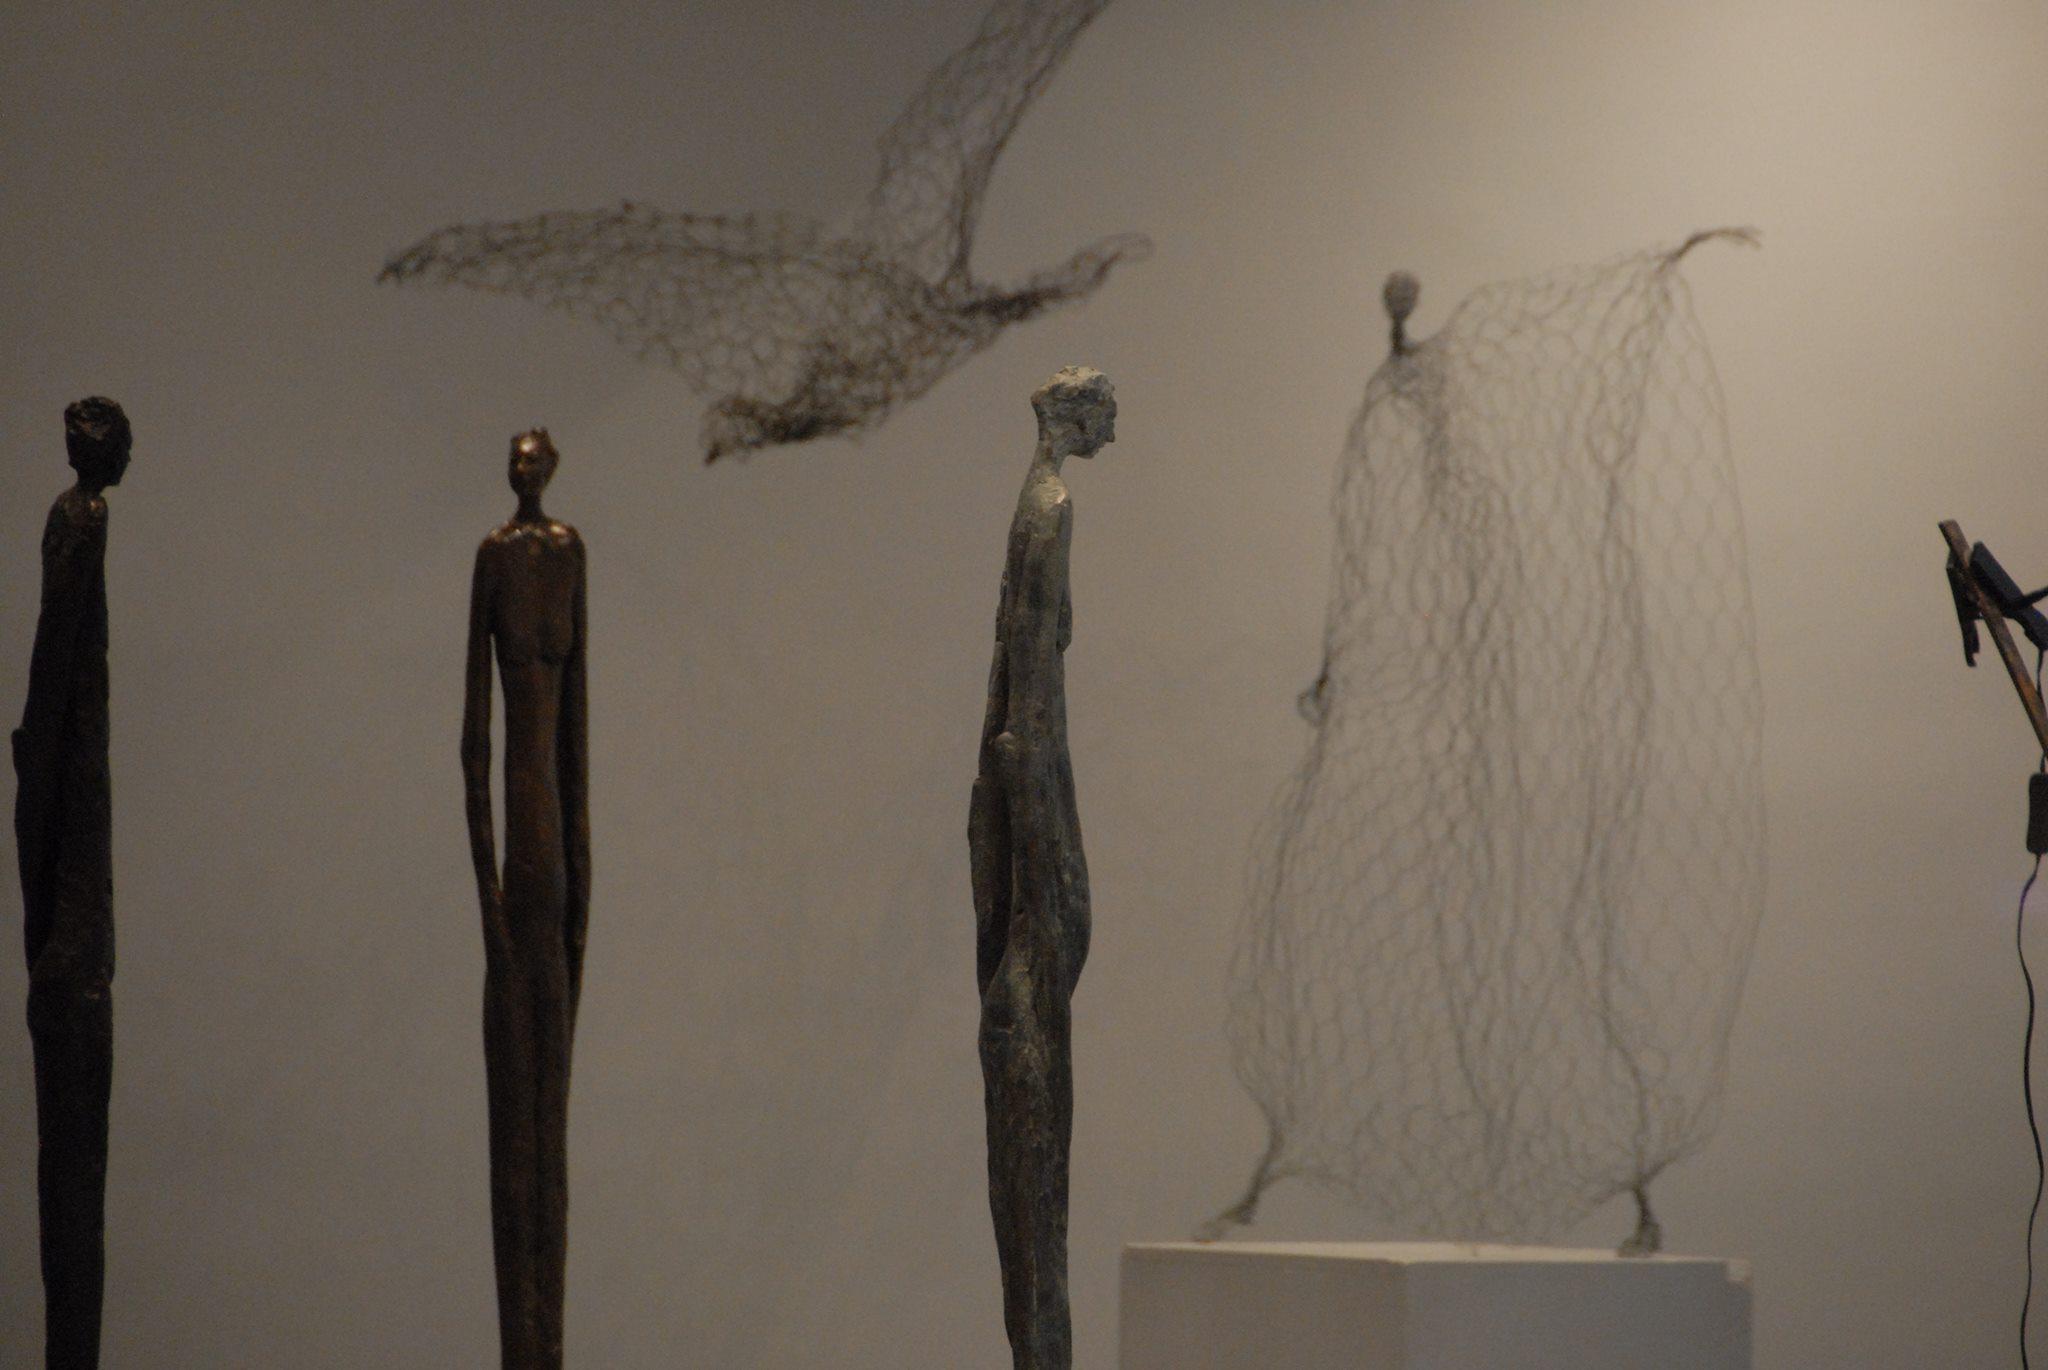 Magic Wire mesh sculptures by Pauline Ohrel